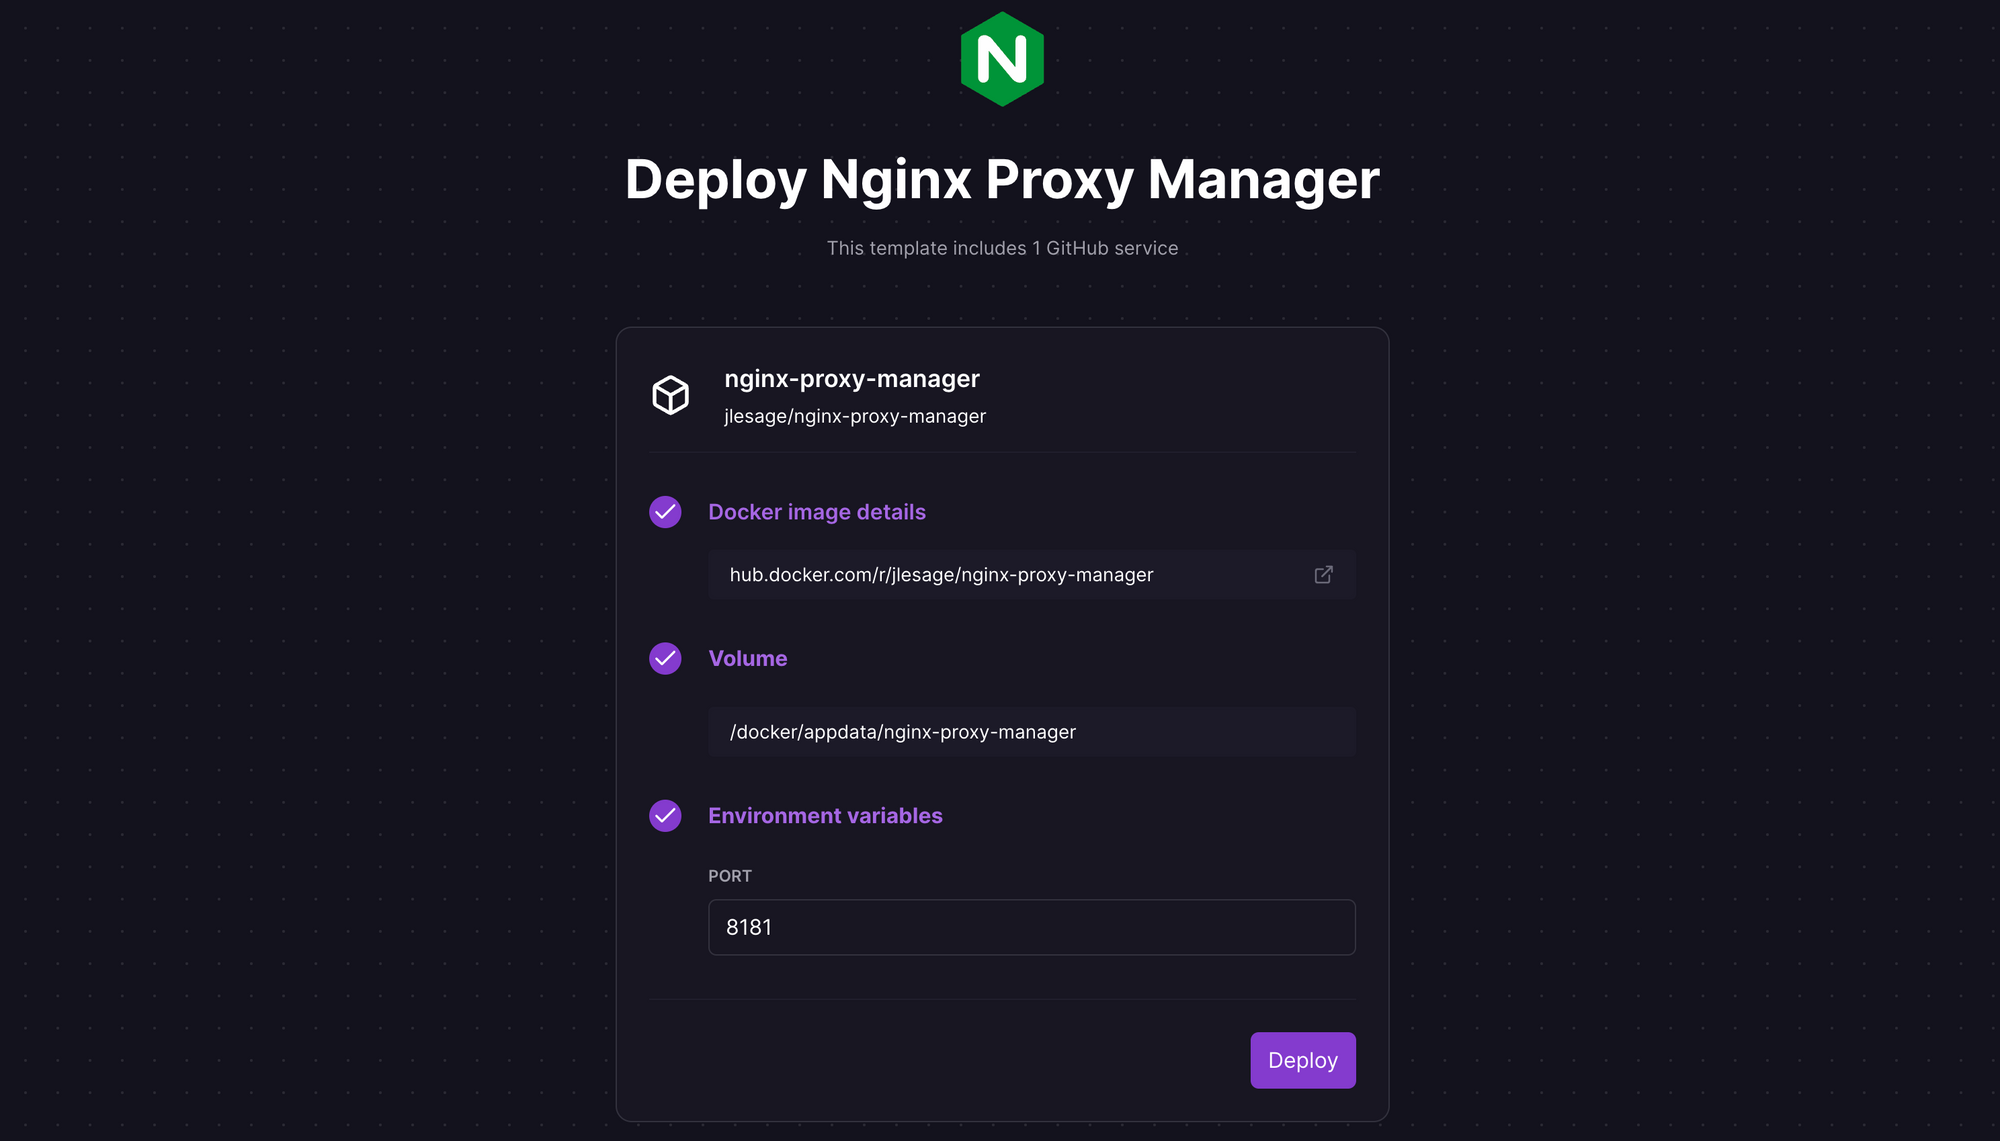 Deploy Nginx Proxy Manager using a one-click template on Railway